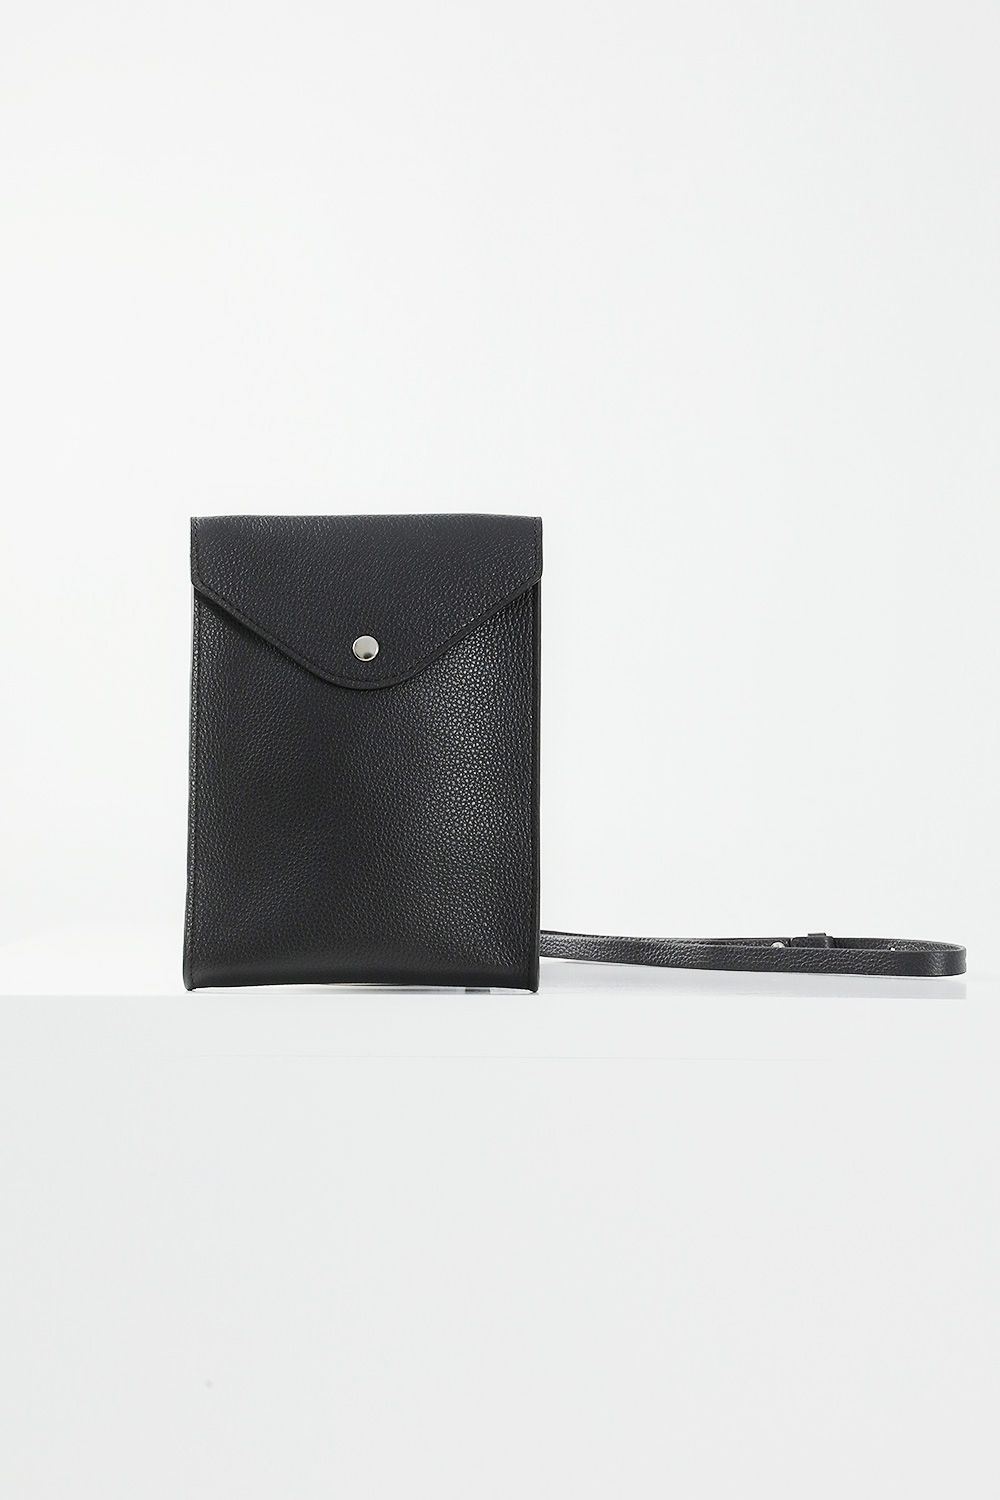 LEMAIRE - ENVELOPPE WITH STRAP(DARK CHOCOLATE) | Acacia ONLINESTORE